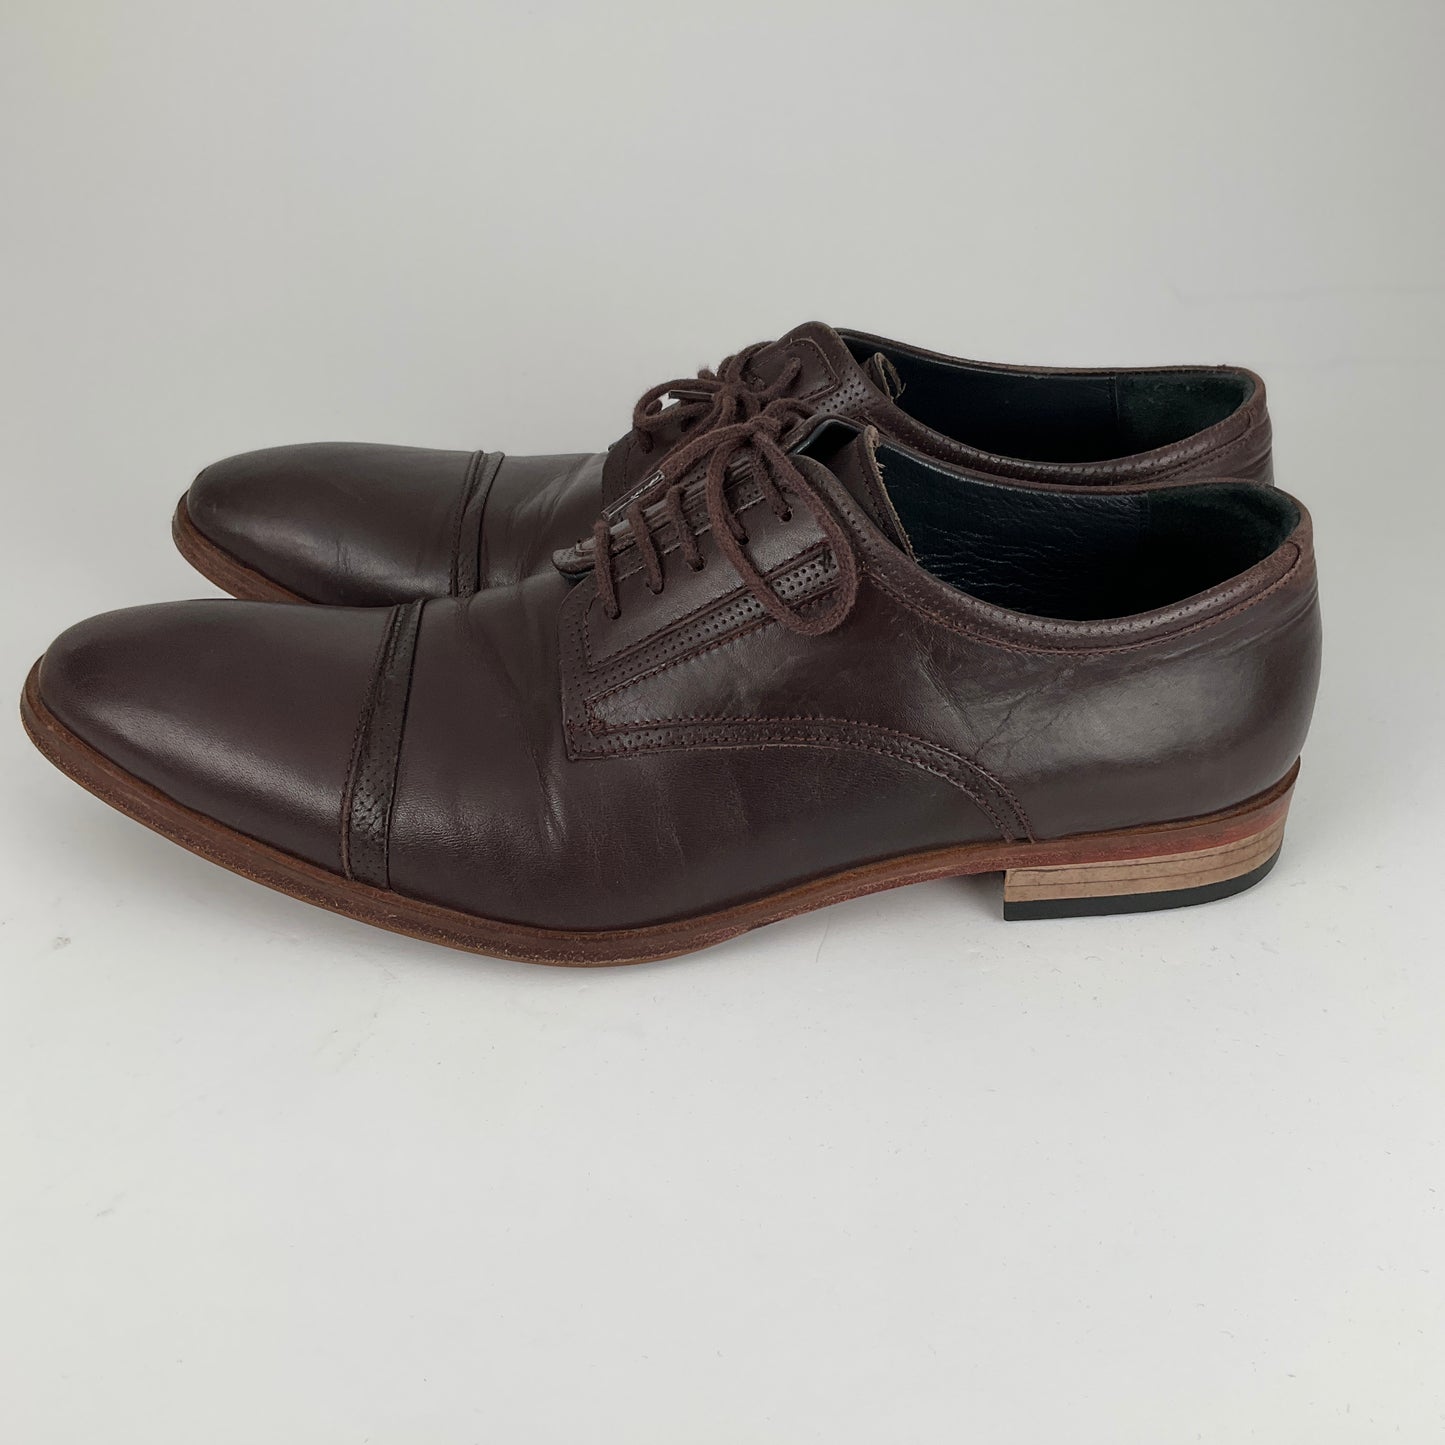 Brando - Brown Leather Shoes - Size 41